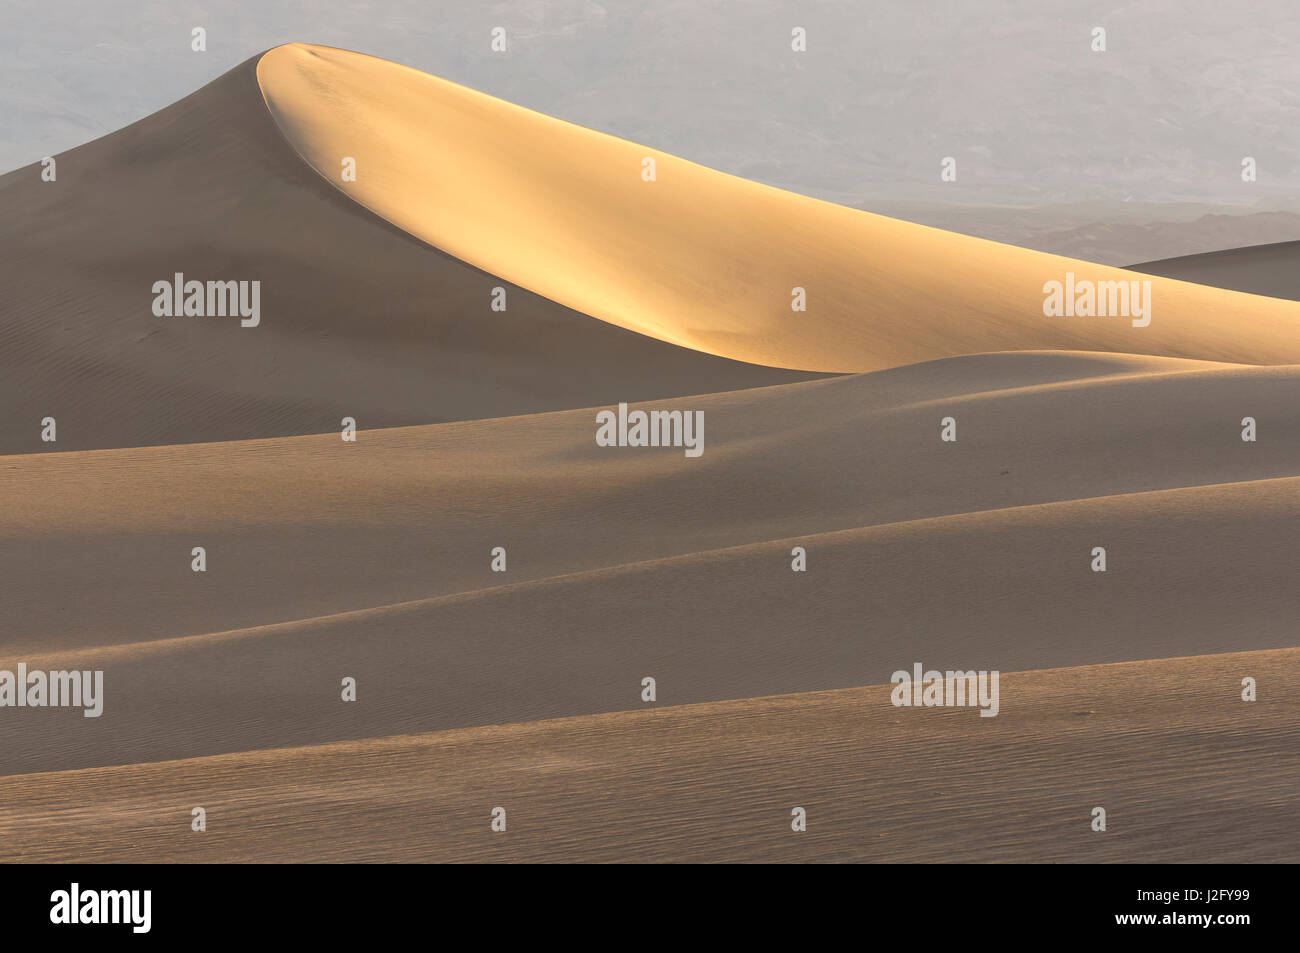 Mesquite Flat Sand Dunes at dawn, Death Valley, California Stock Photo ...